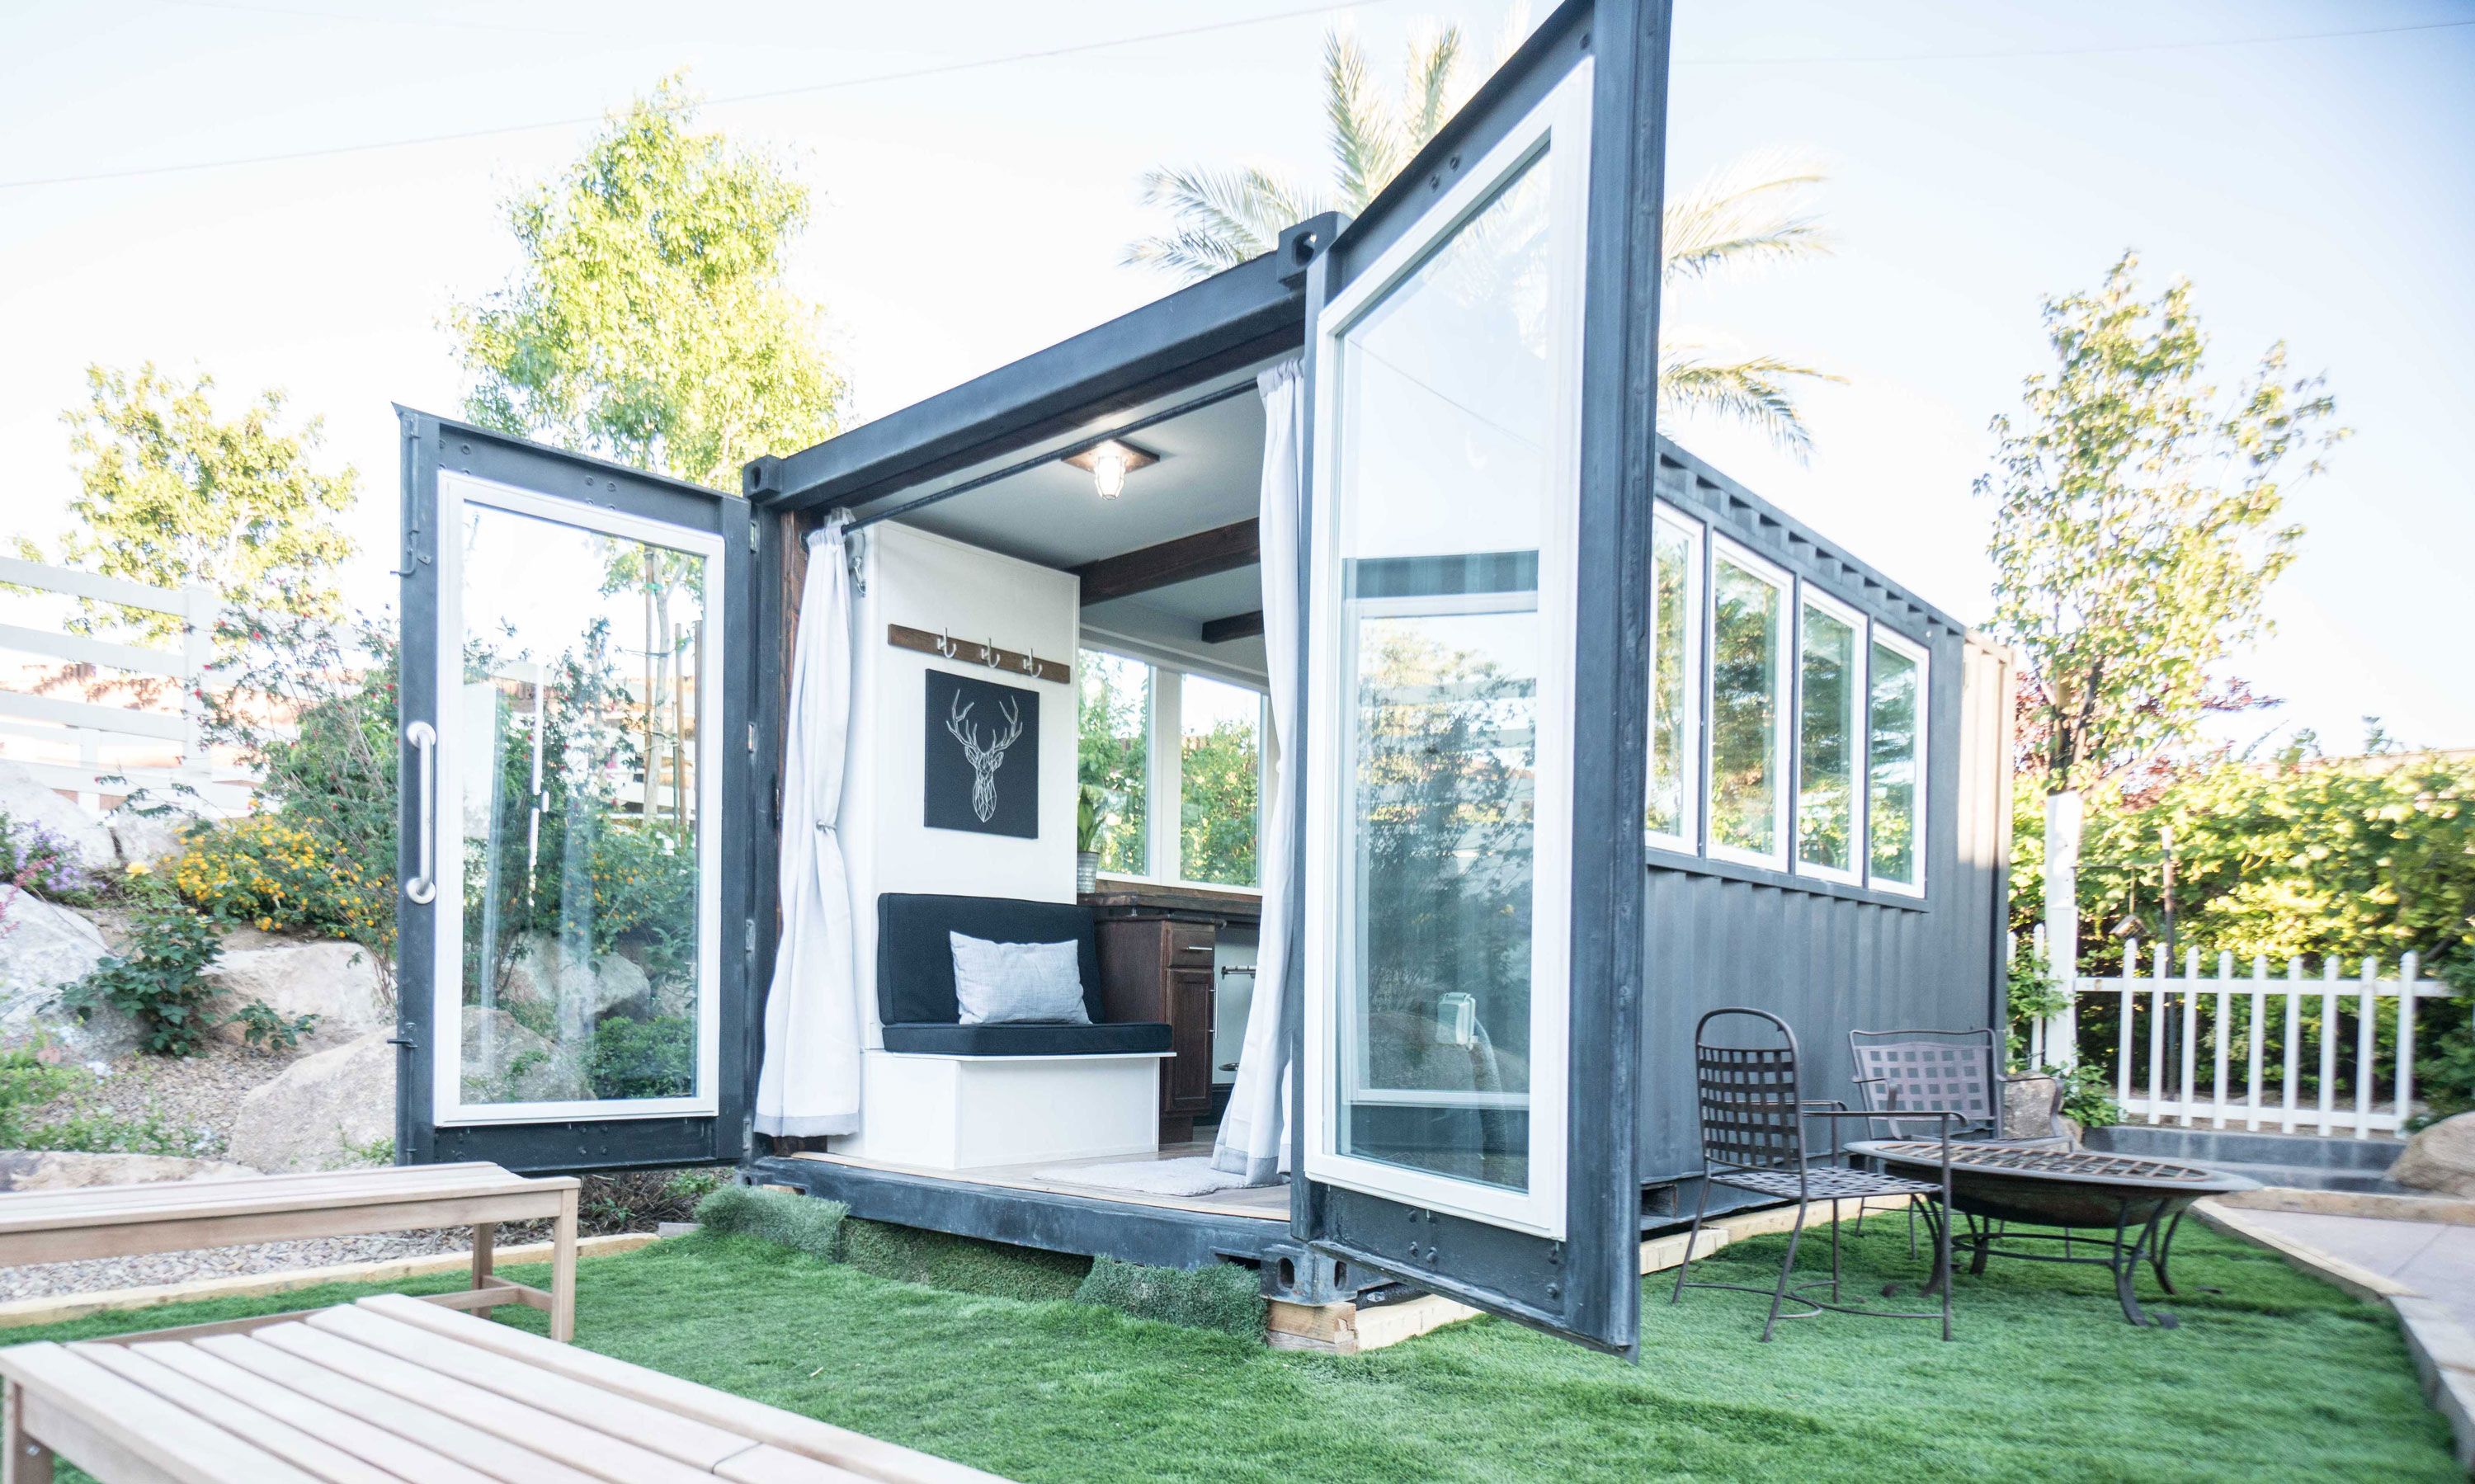 Three Squared Inc Container Homes